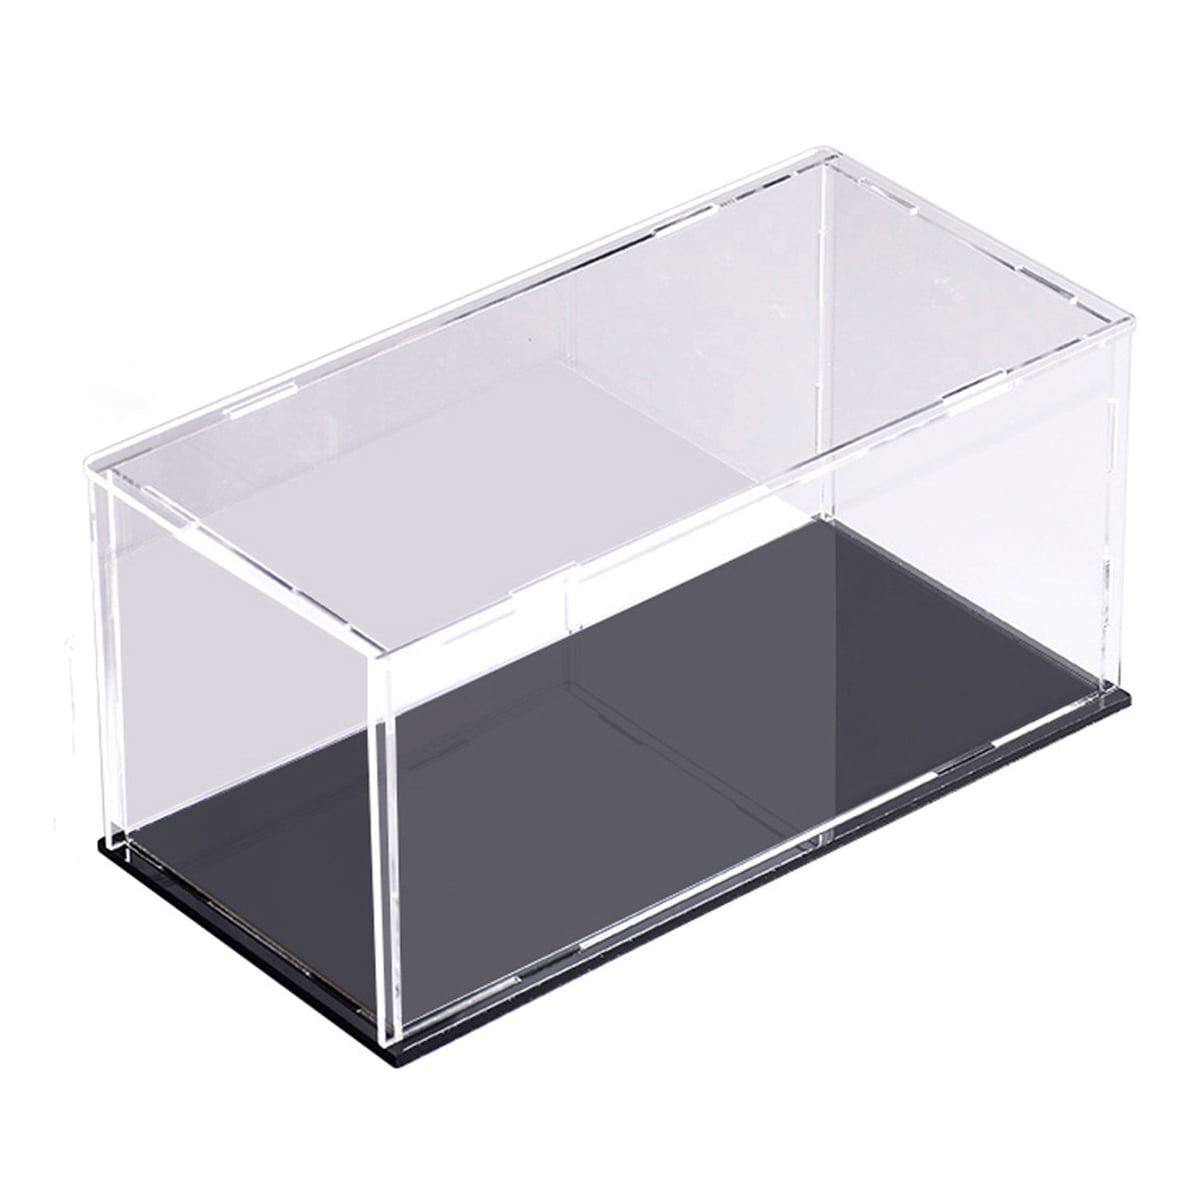 Lego Mini Figures Collector Stackable Clear Storage Display Case Laser Printing